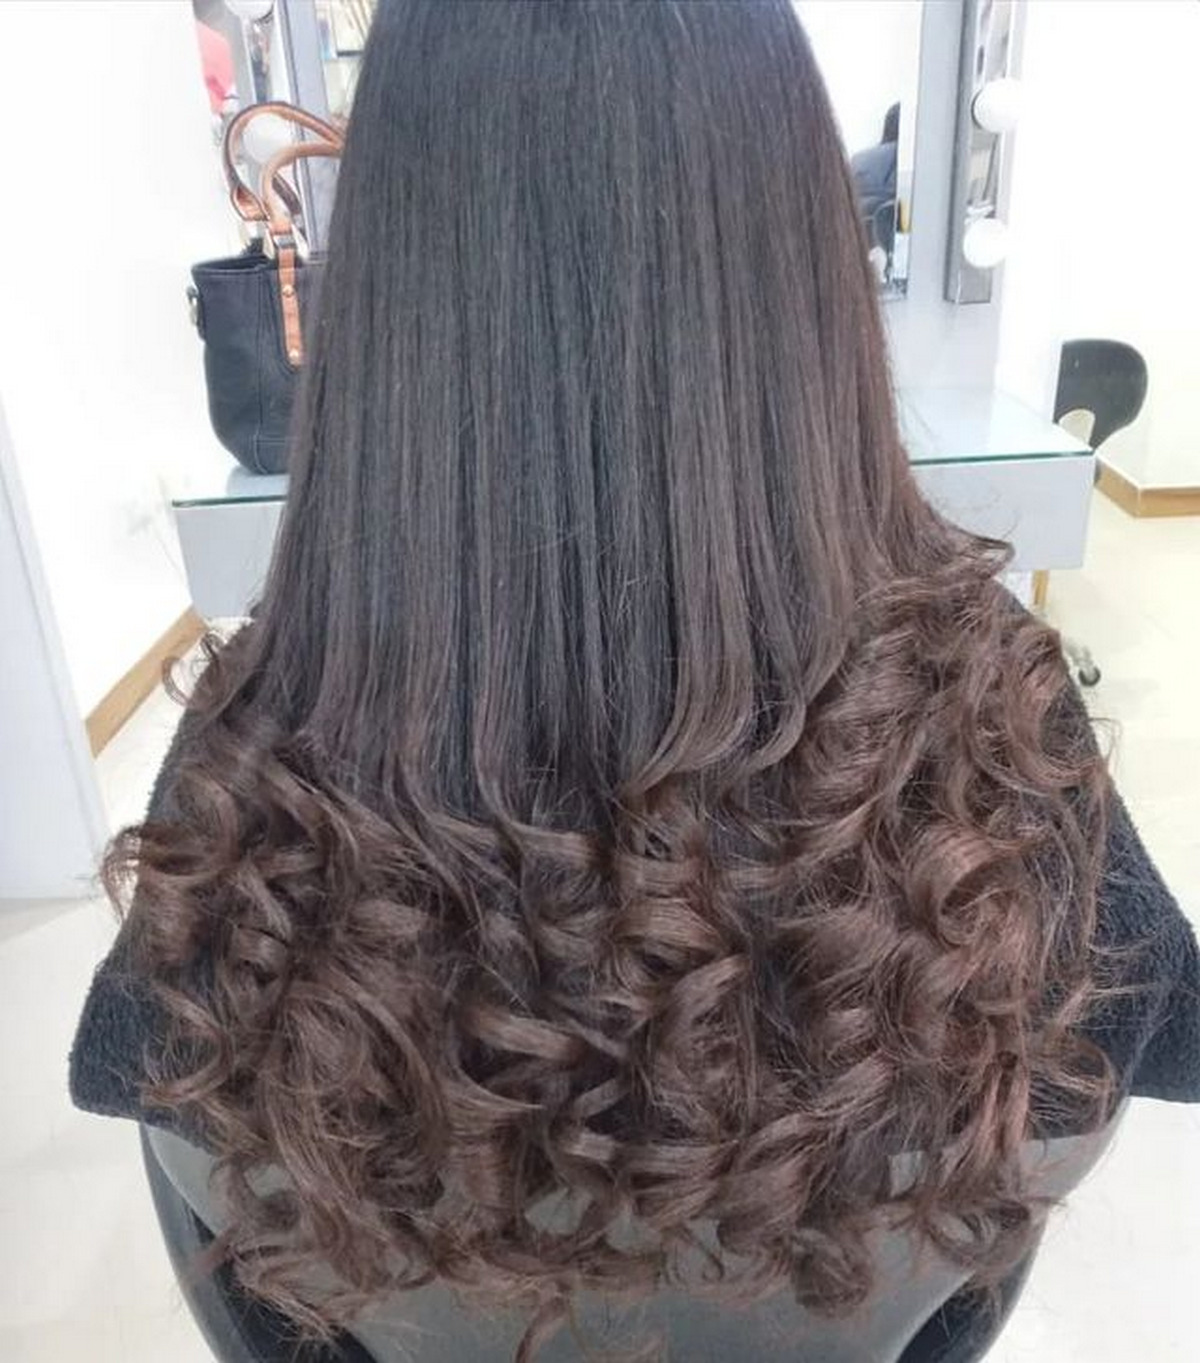 Long layered low curls